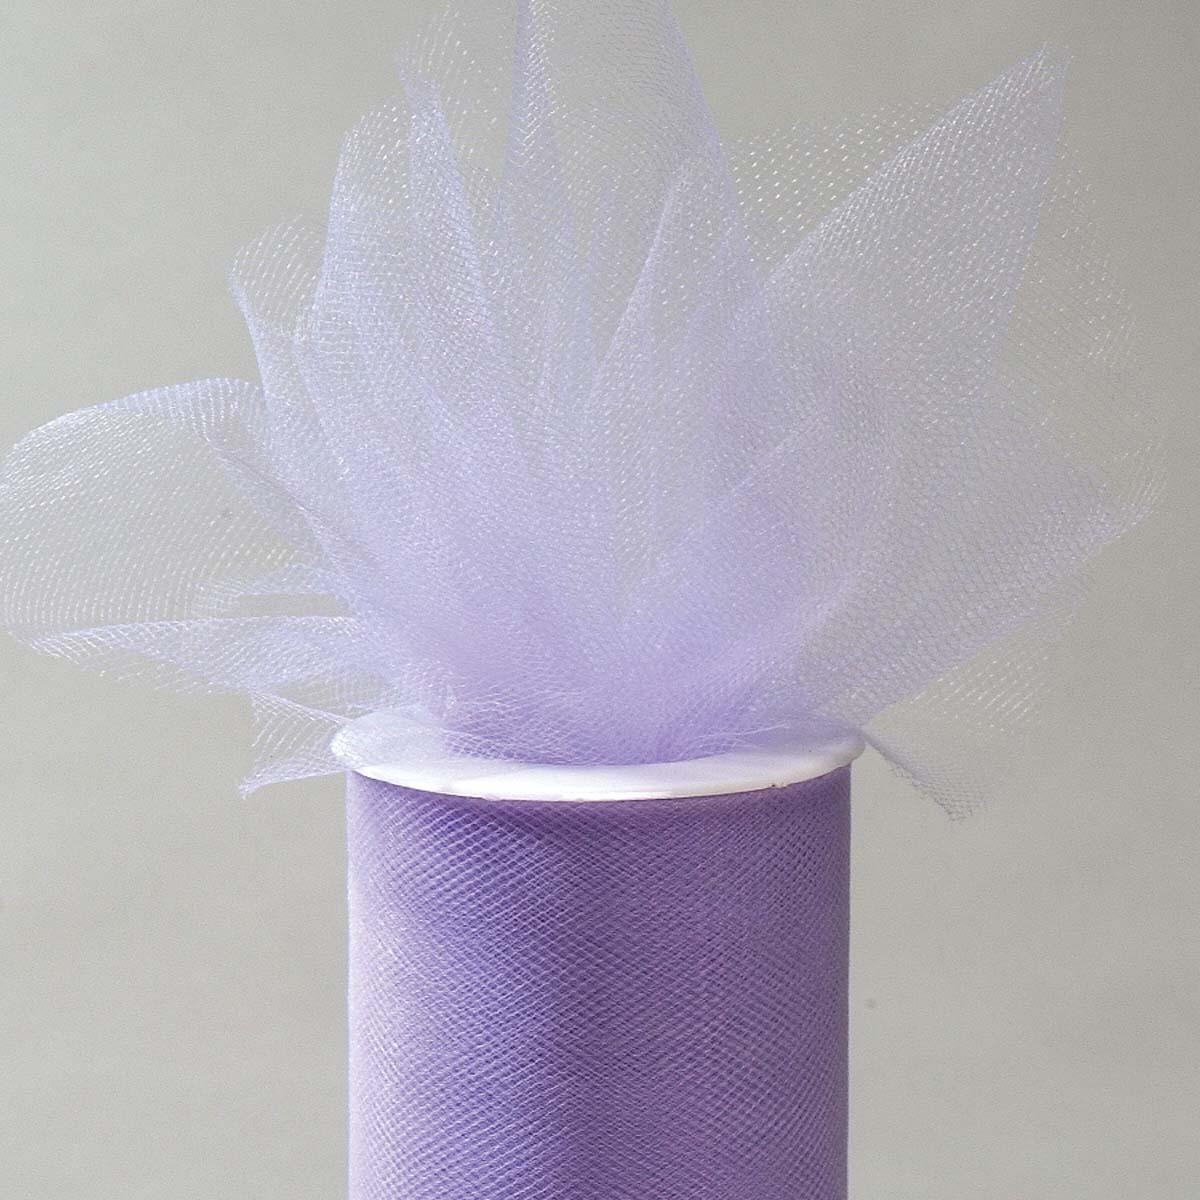 Buy Decorations Tulle Roll - Lavender 6 in. x 25 yds sold at Party Expert